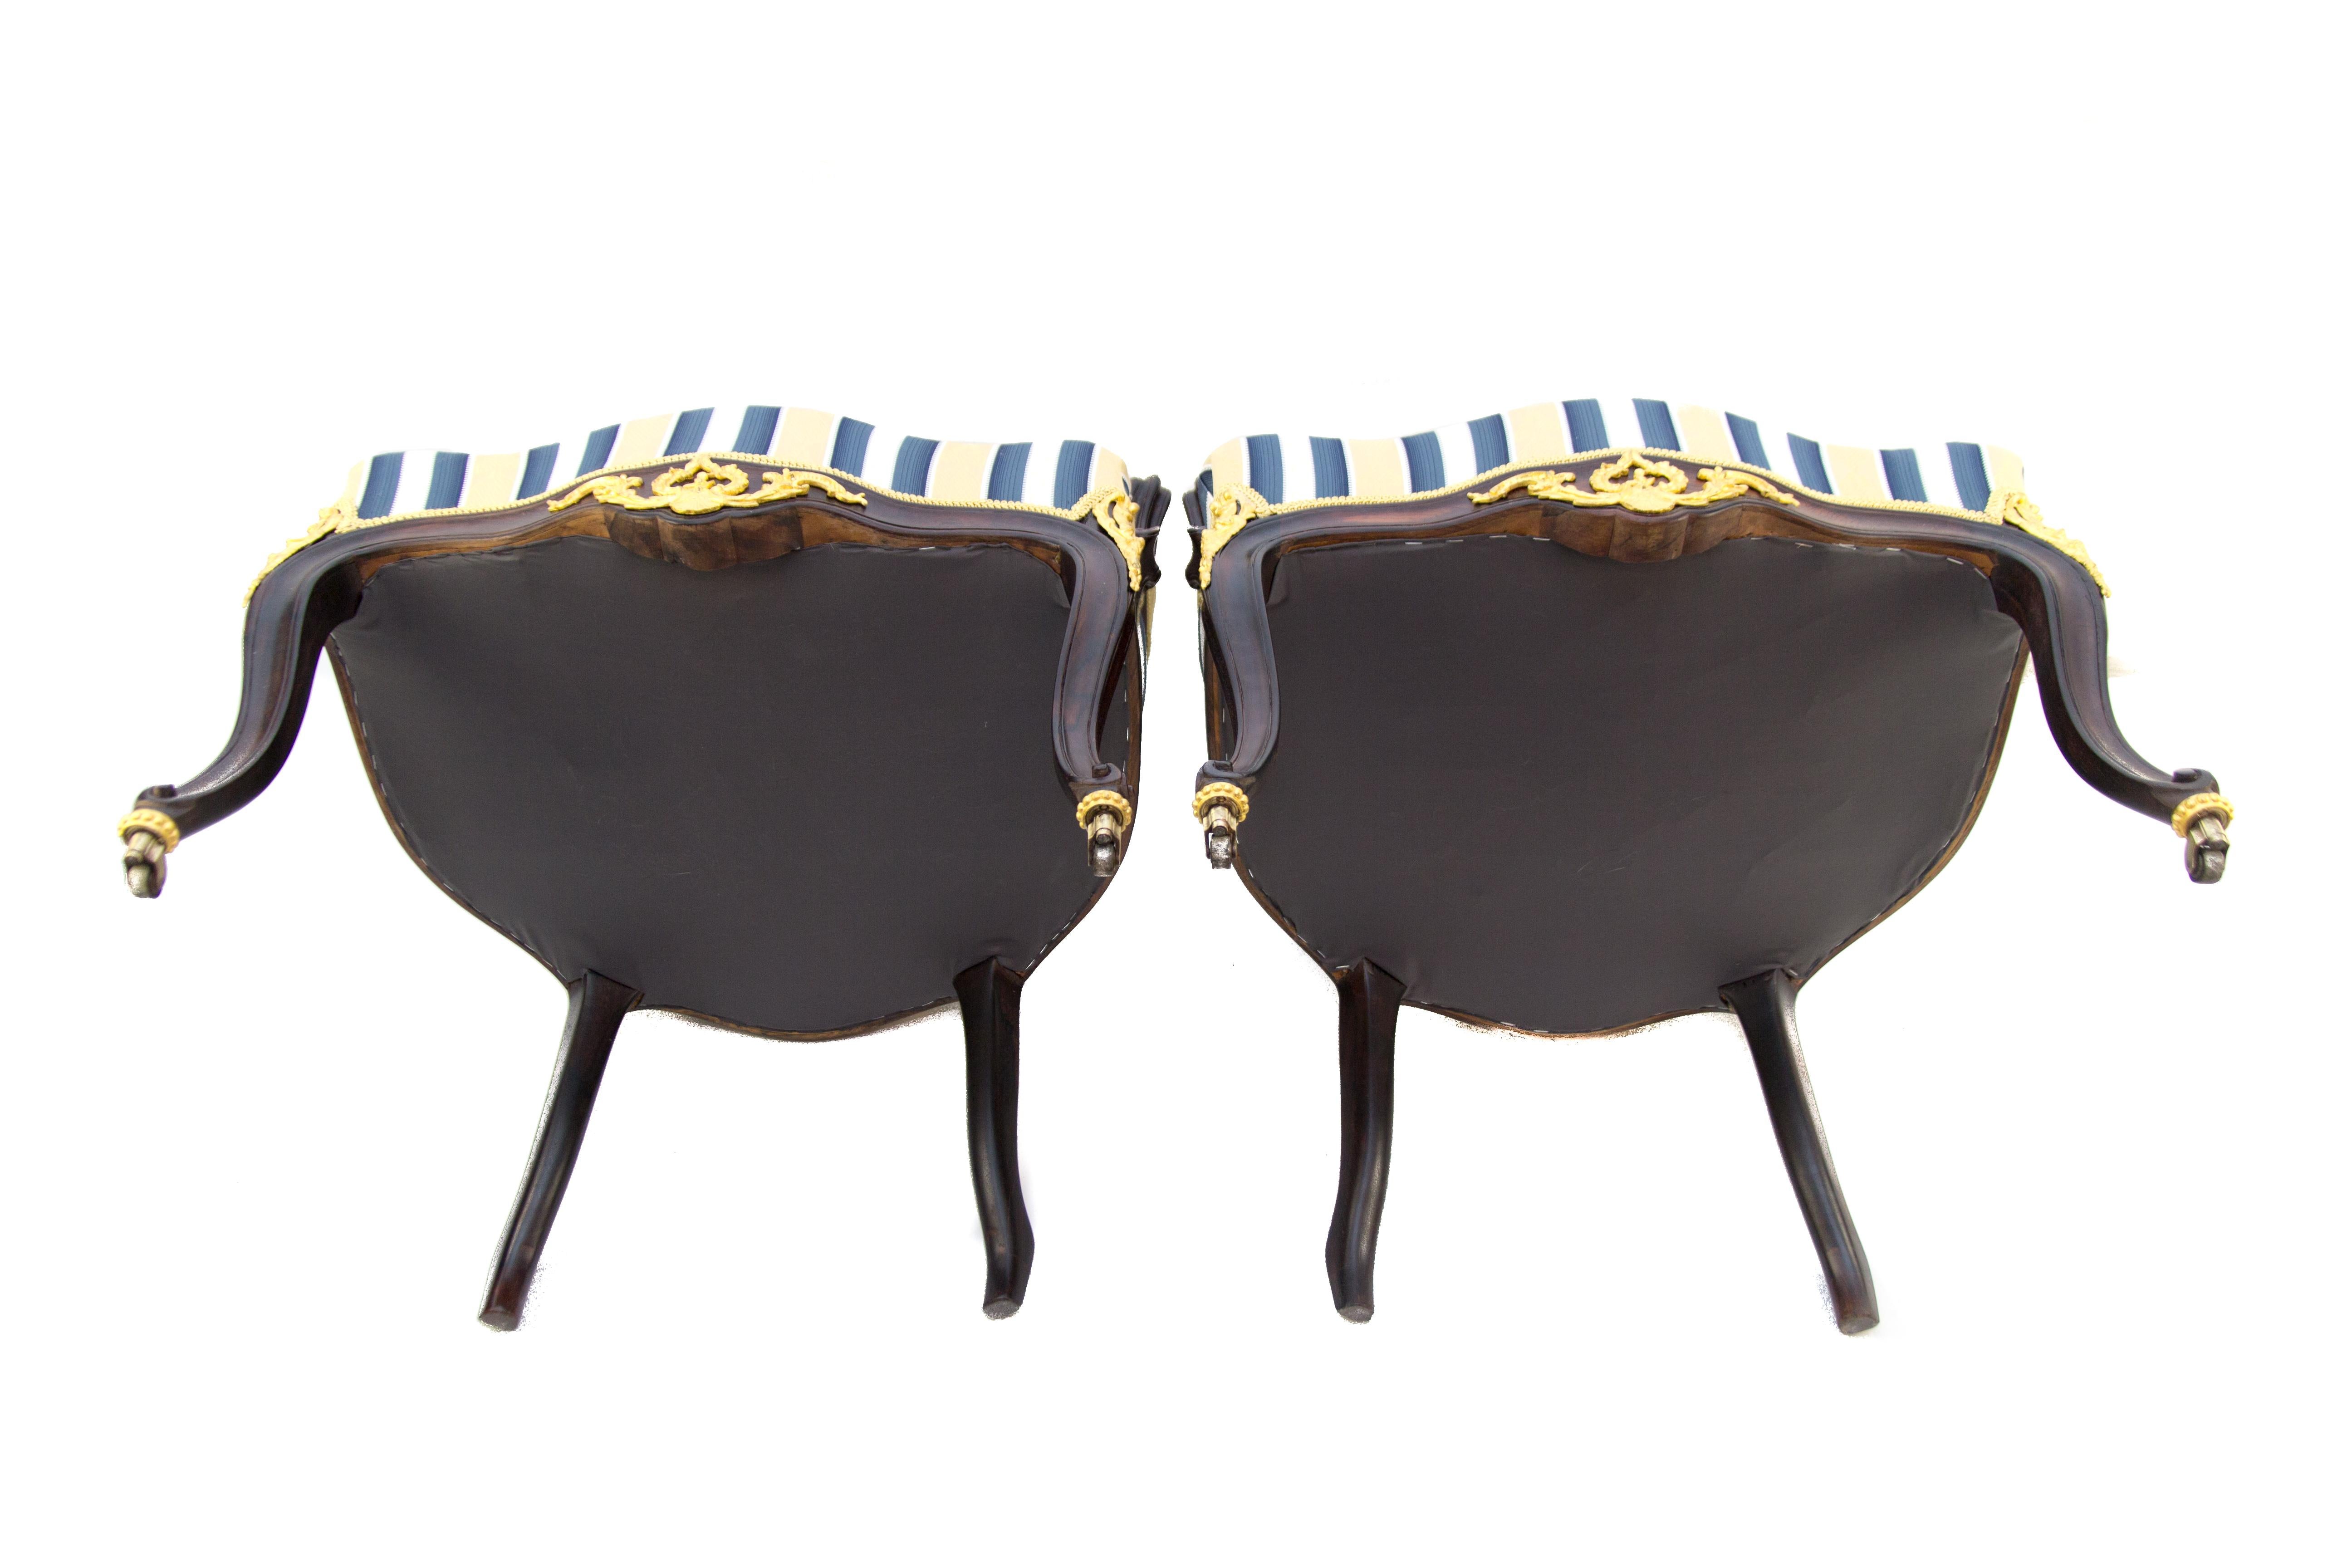 Pair of 19th Century Louis XV Style Walnut Armchairs in Golden, Blue, and White  For Sale 4